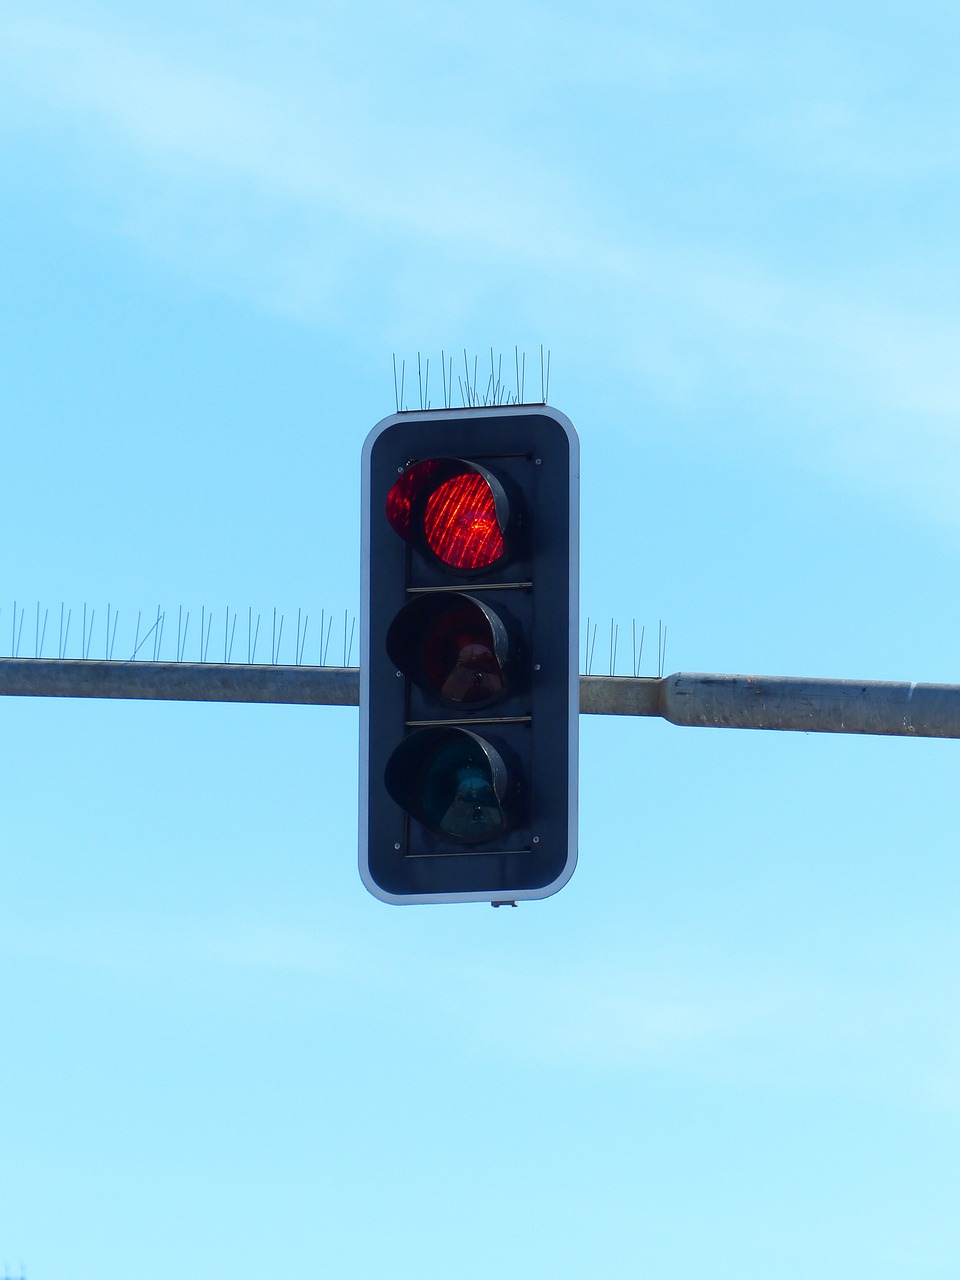 traffic lights beacon rules of the road free photo